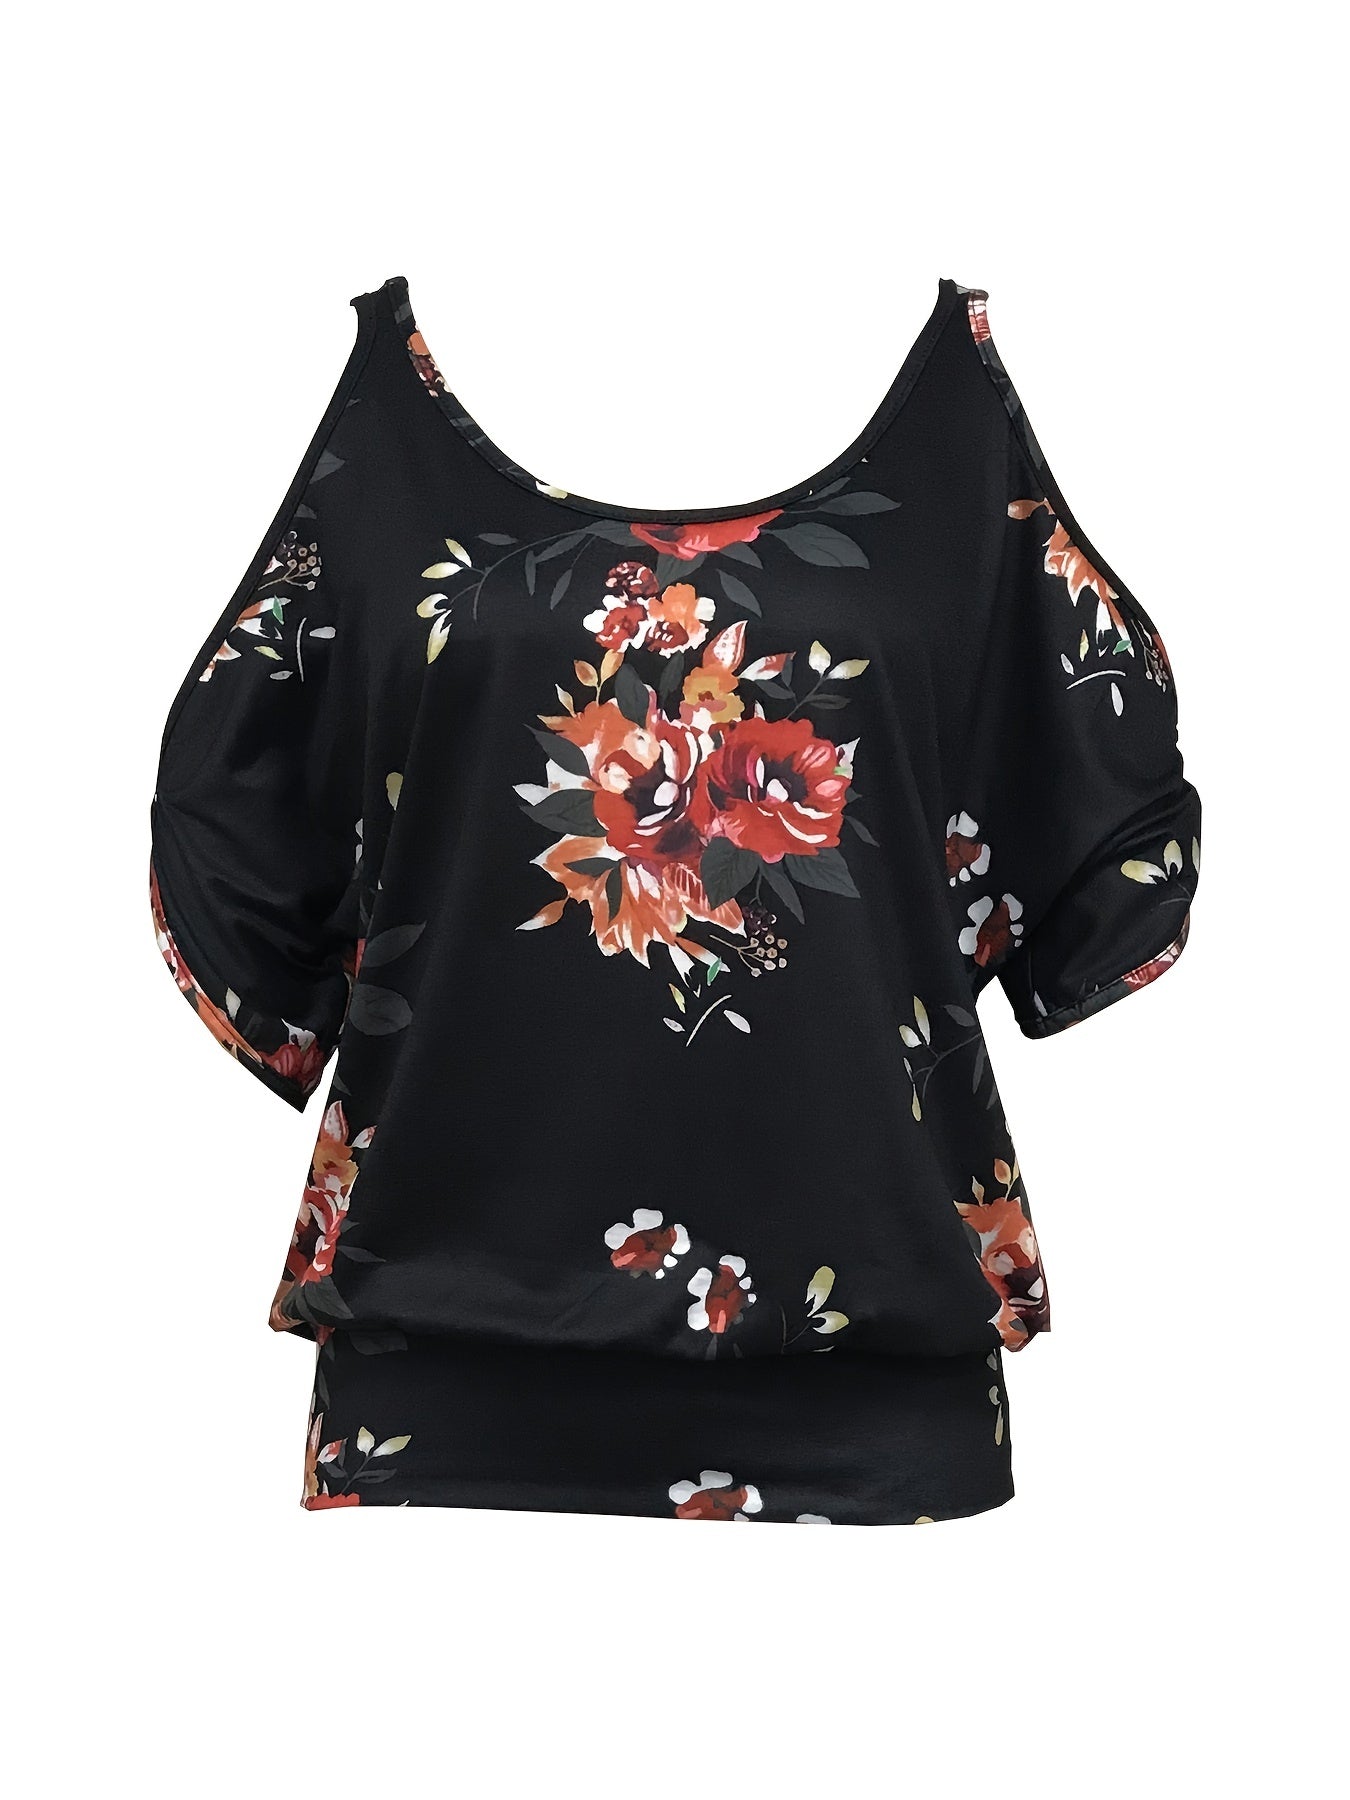 Vzyzv Floral Print Cold Shoulder T-Shirt, Casual Cutout Short Sleeve Top For Spring & Summer, Women's Clothing